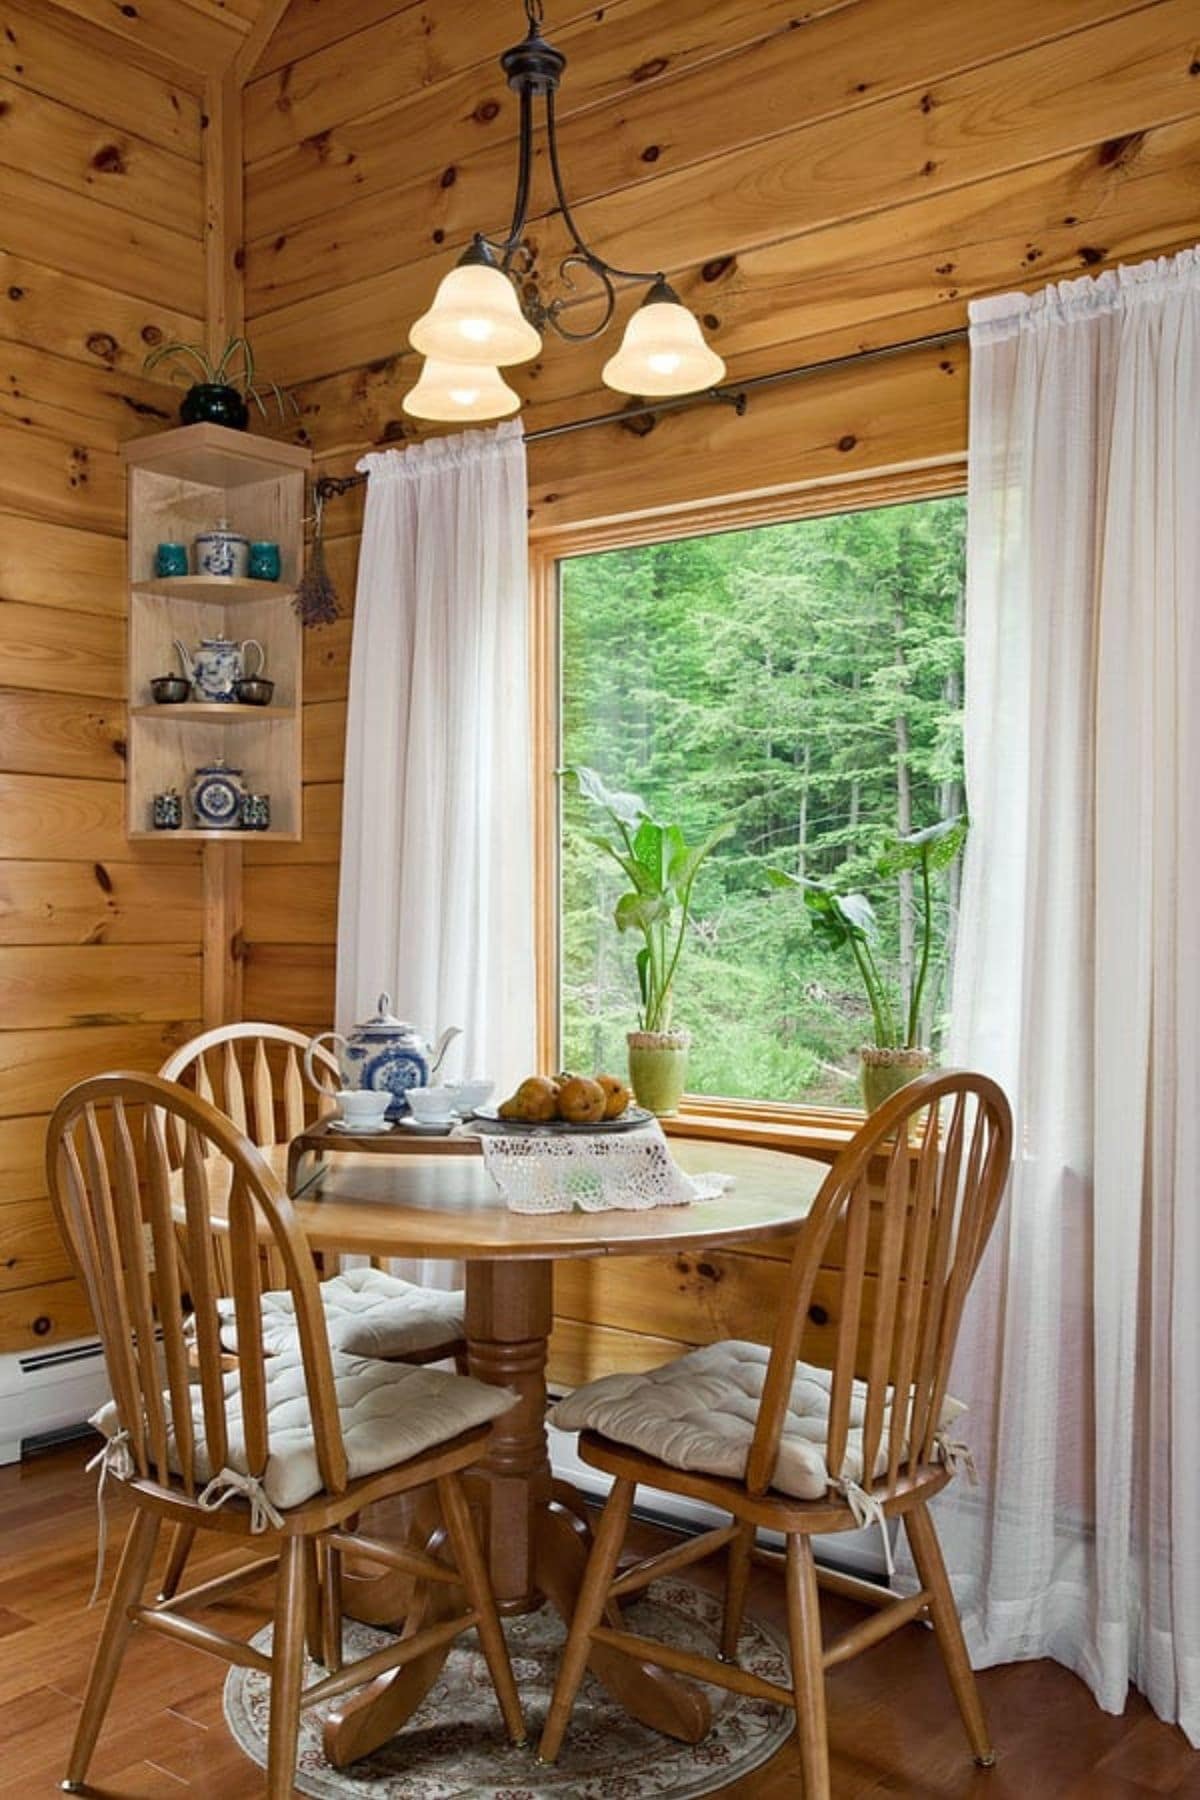 wood four person table against window with white curtains